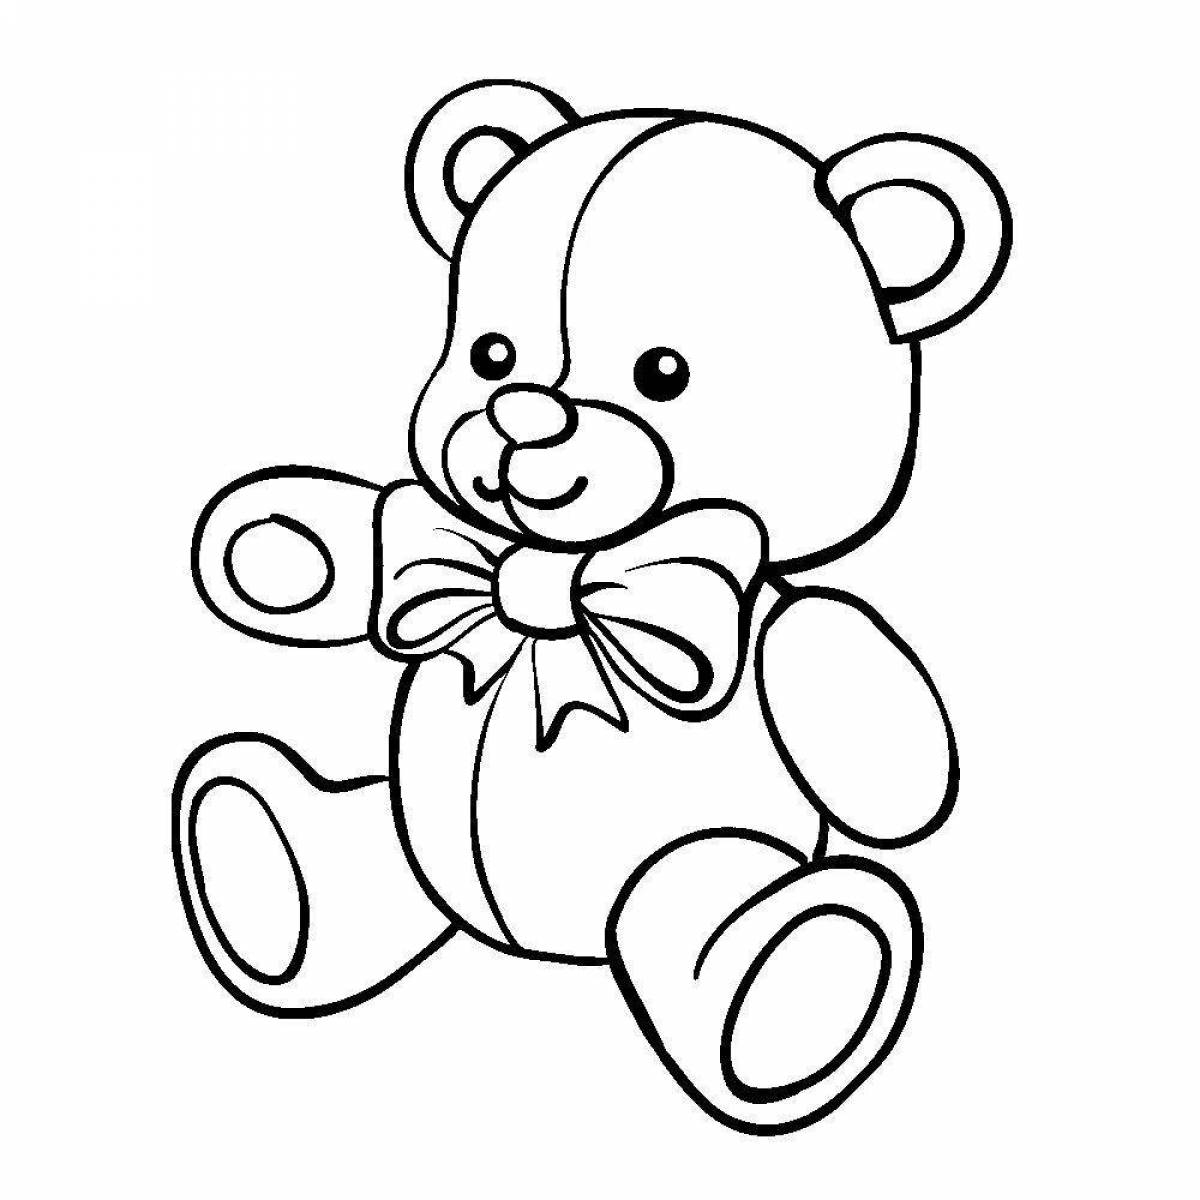 Colouring bright teddy bear for girls